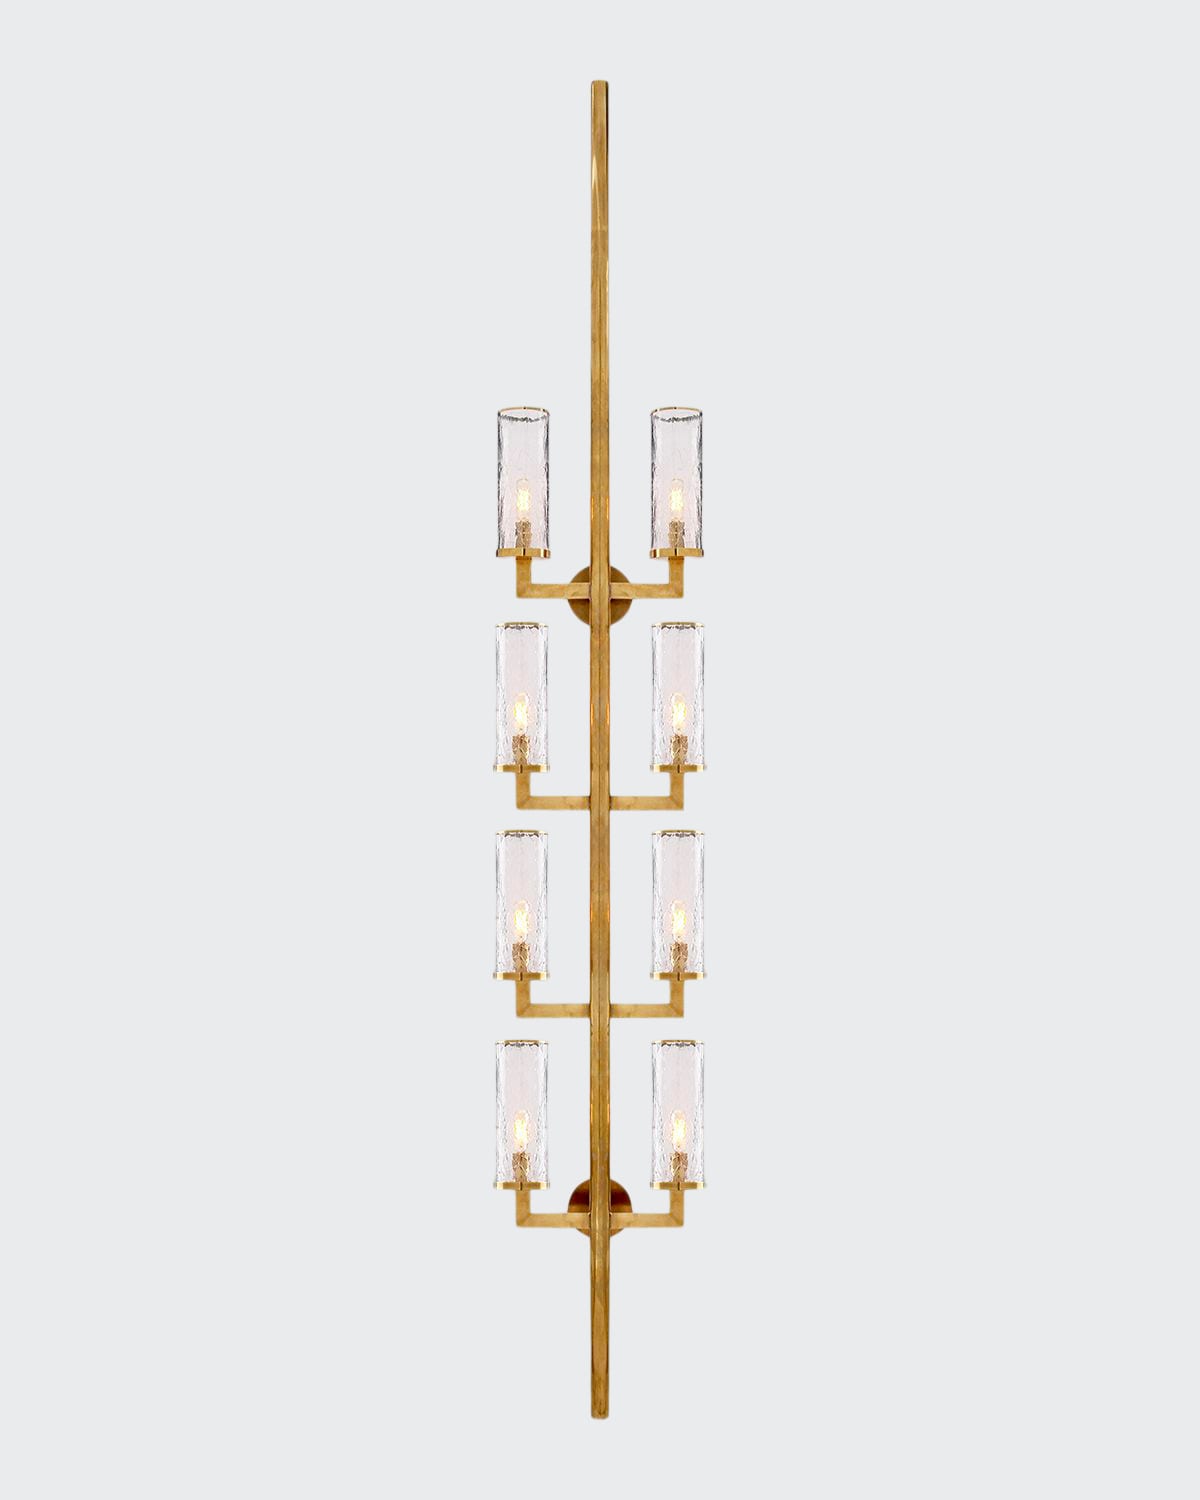 Kelly Wearstler For Visual Comfort Signature Liaison Statement Sconce In Antique Brass